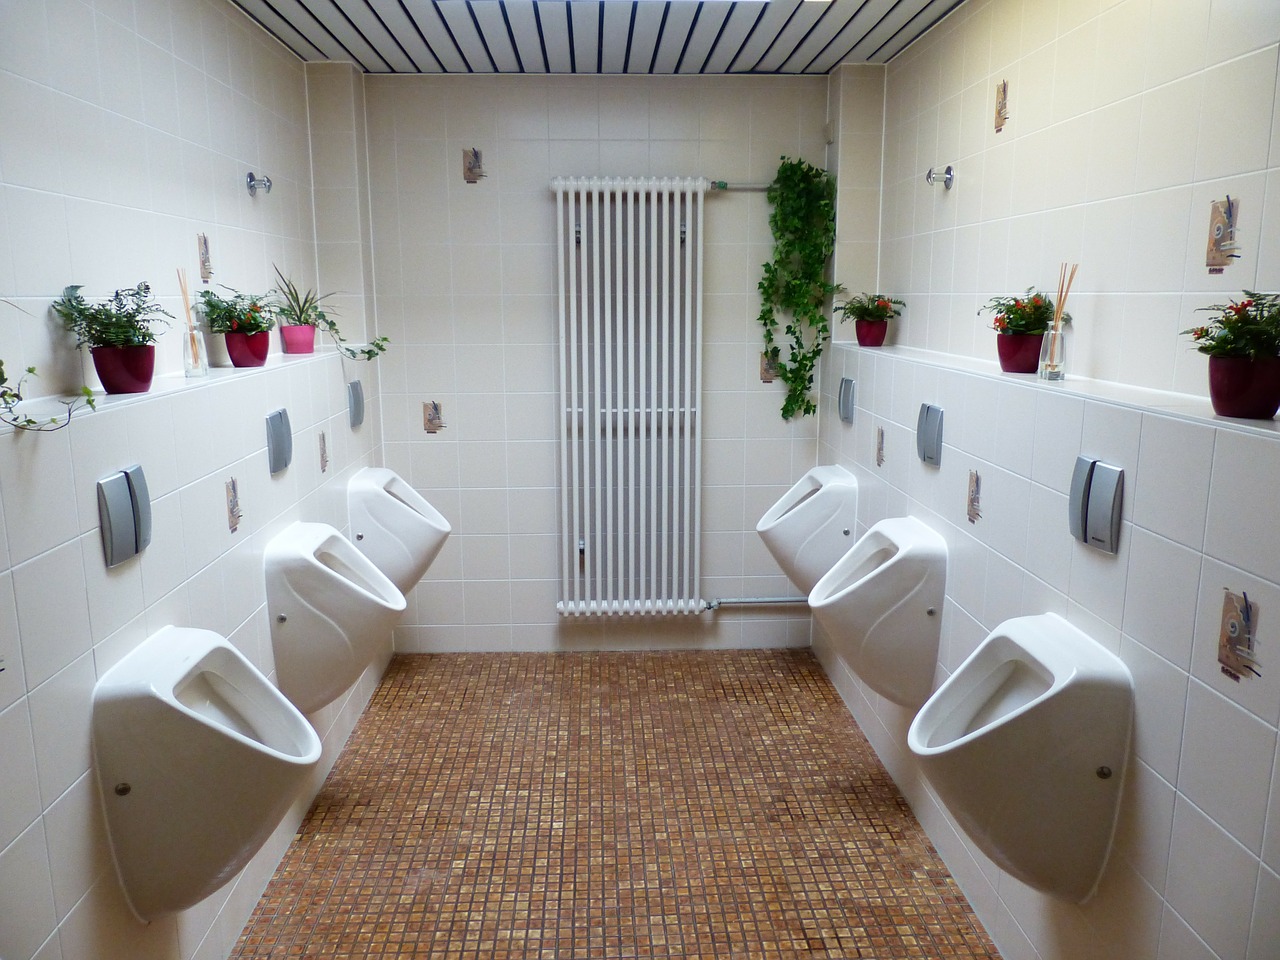 Download free photo of Toilet,wc,urinal,public,public toilet - from needpix.com